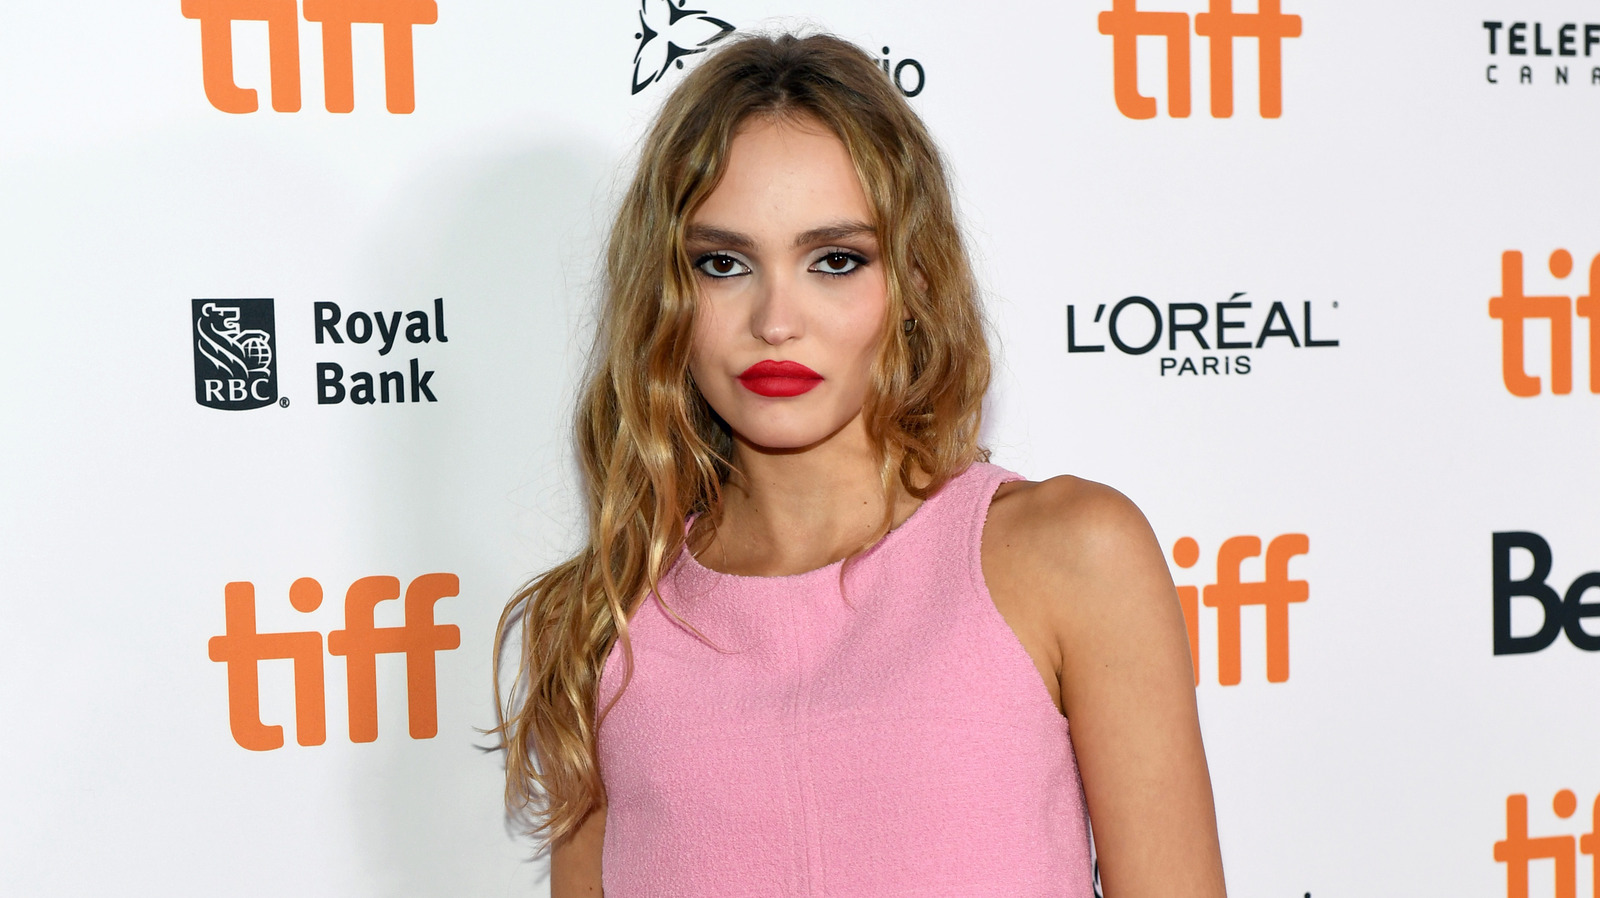 Lily-Rose Depp follows in the footsteps of Vanessa Paradis for Chanel